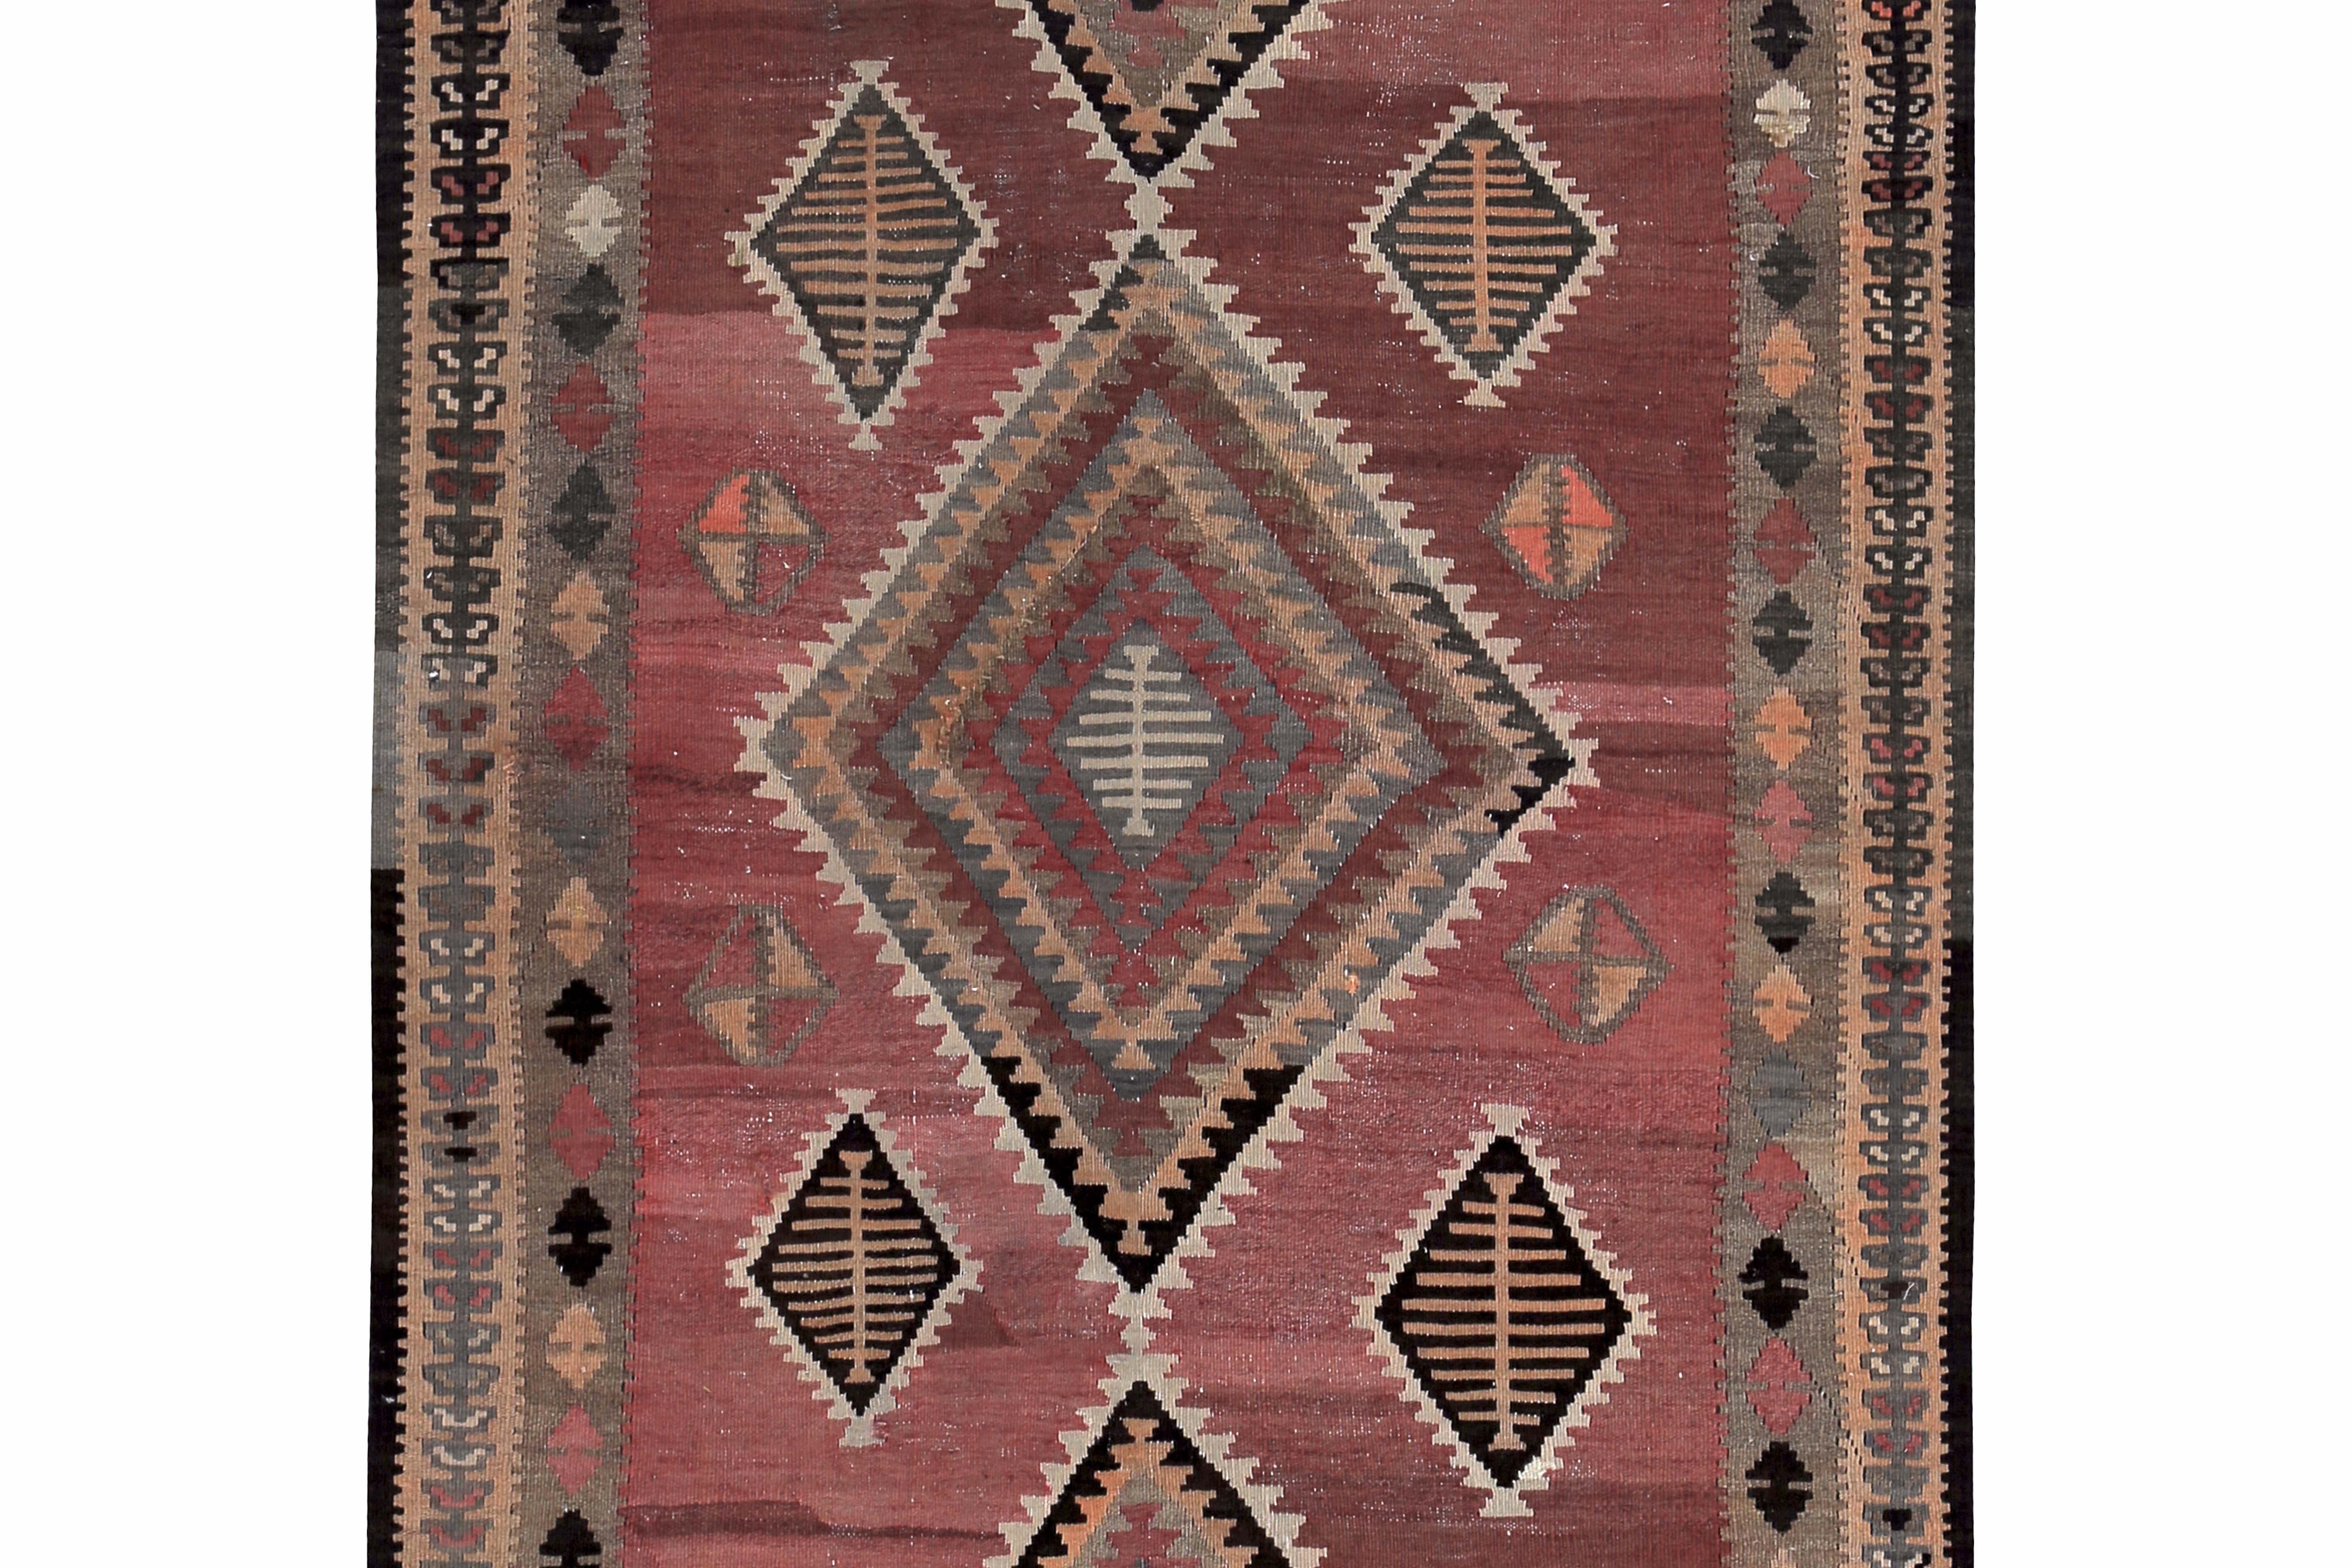 Hand-Woven Modern Turkish Kilim Rug with Black and Red Tribal Diamonds on Orange Field For Sale